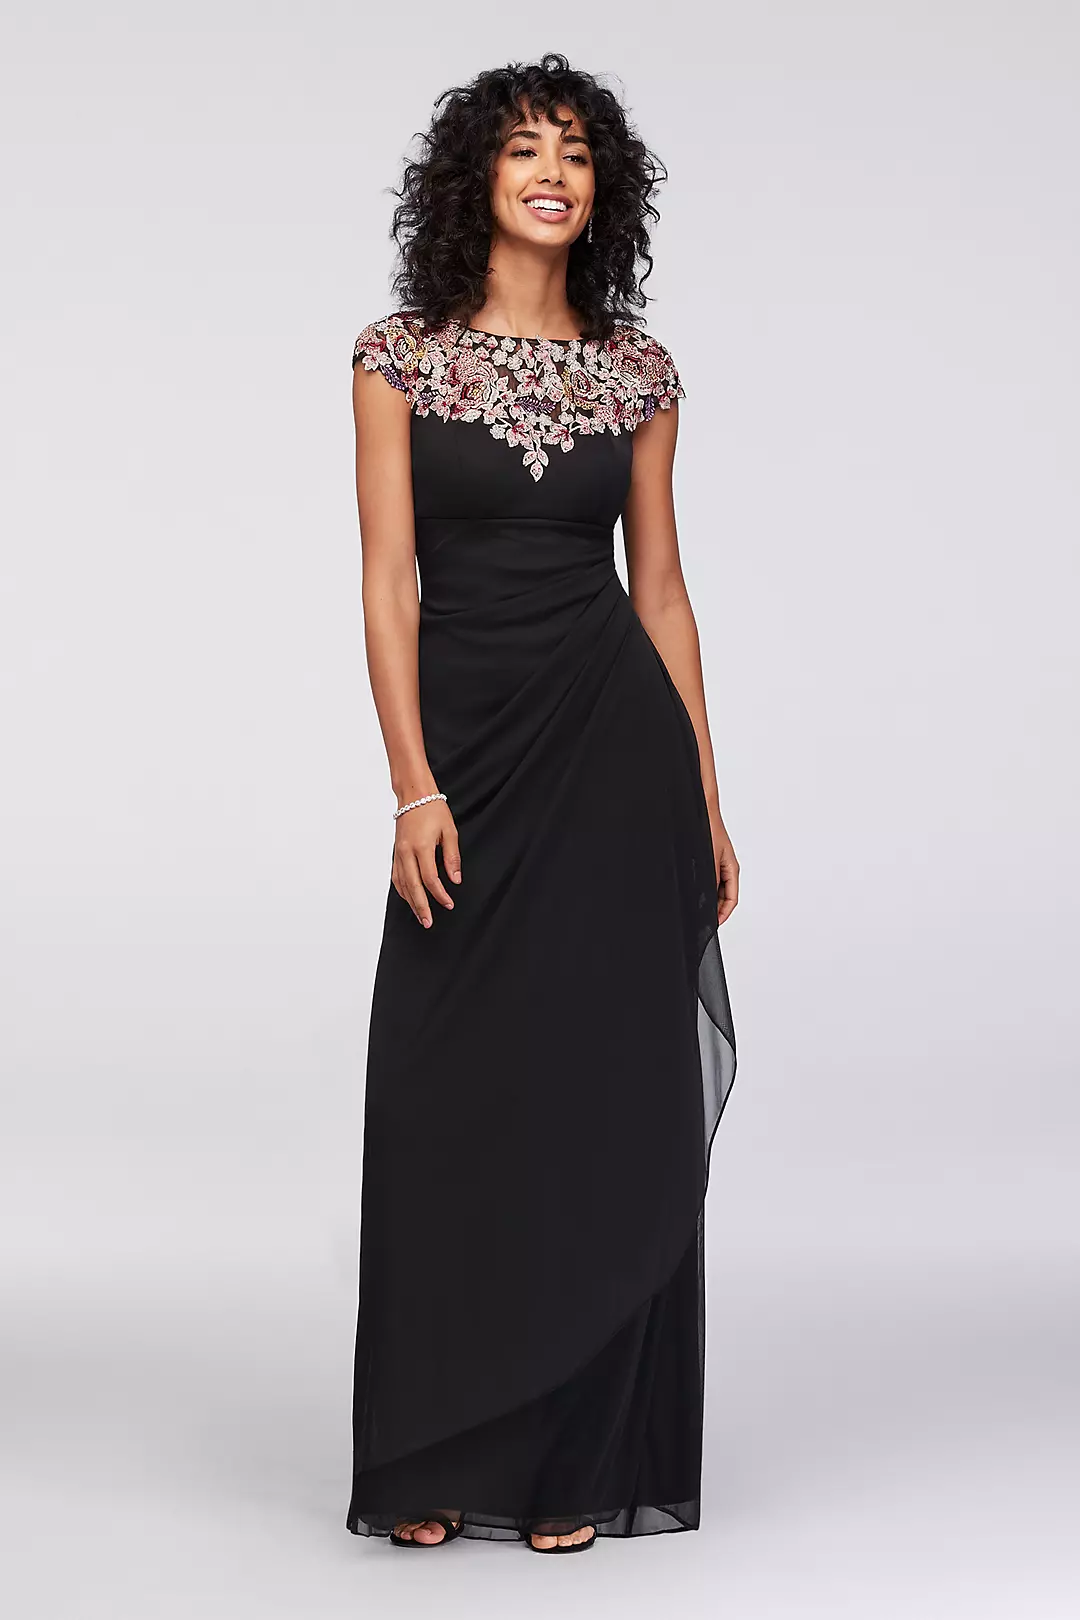 Floral Appliqued Sheath Gown with Ruched Skirt Image